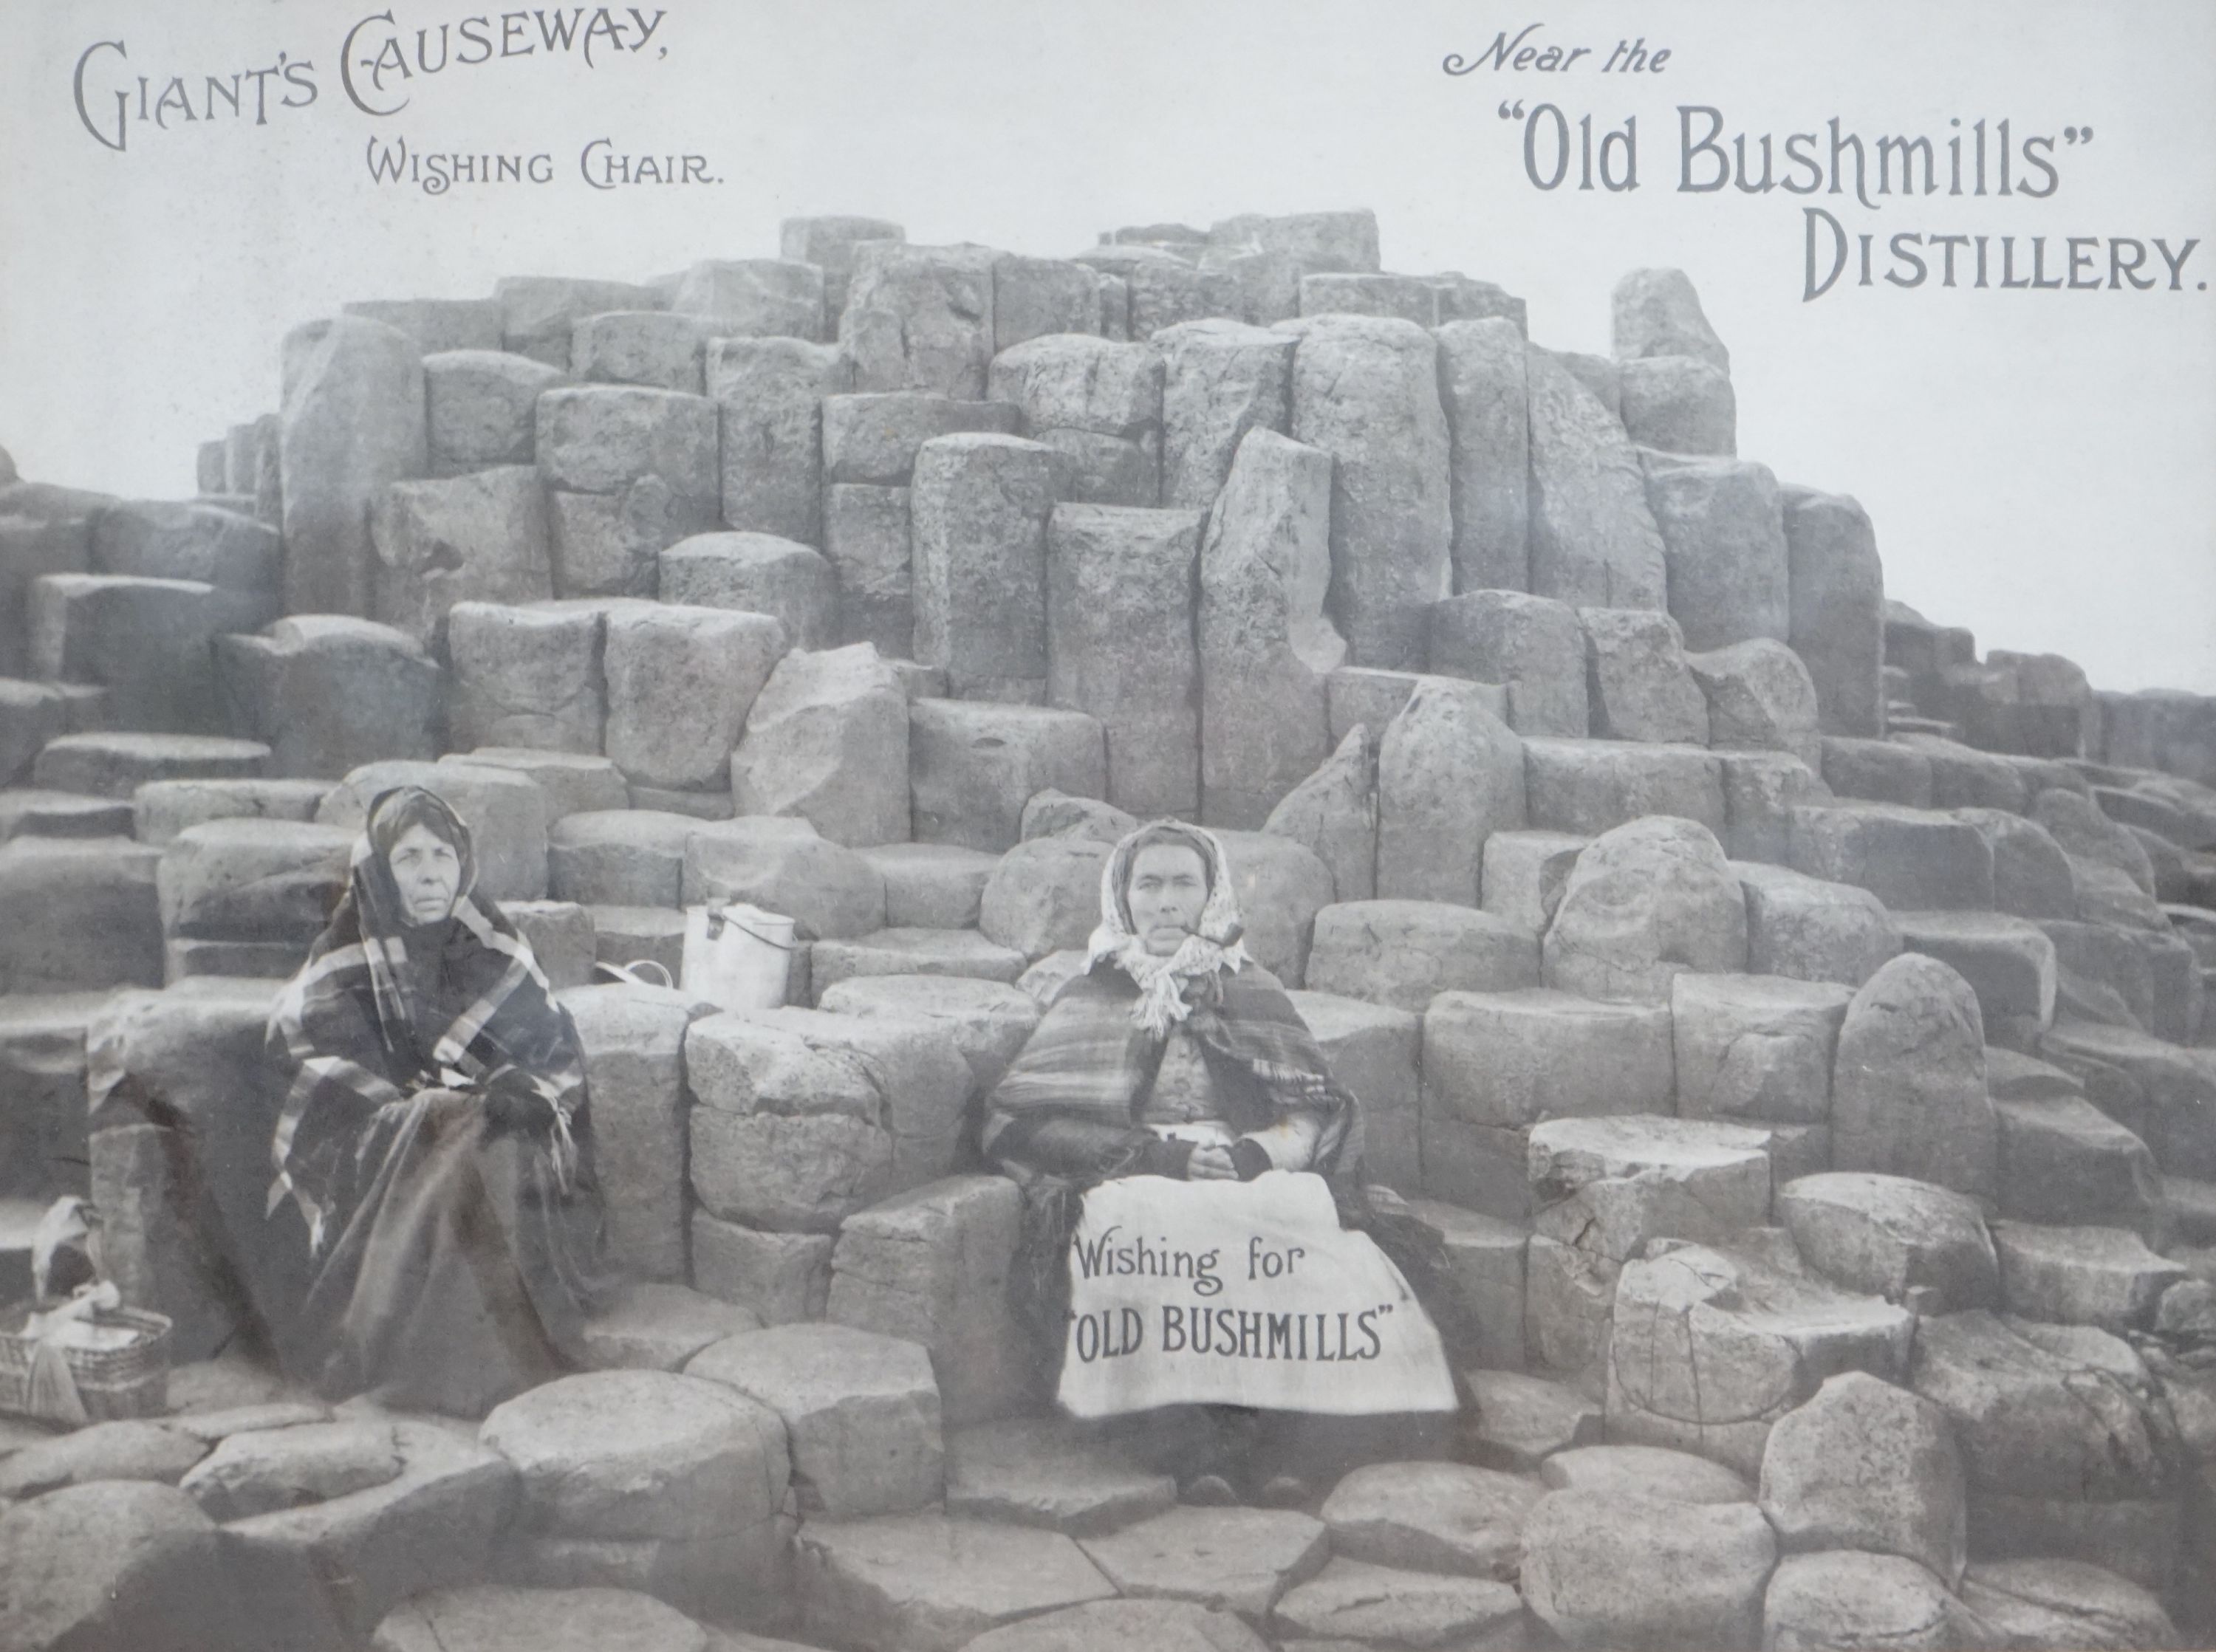 A monochrome advertising print for Old Bushmills Distillery, Giants Causeway, Wishing Chair, 39 x 52cm